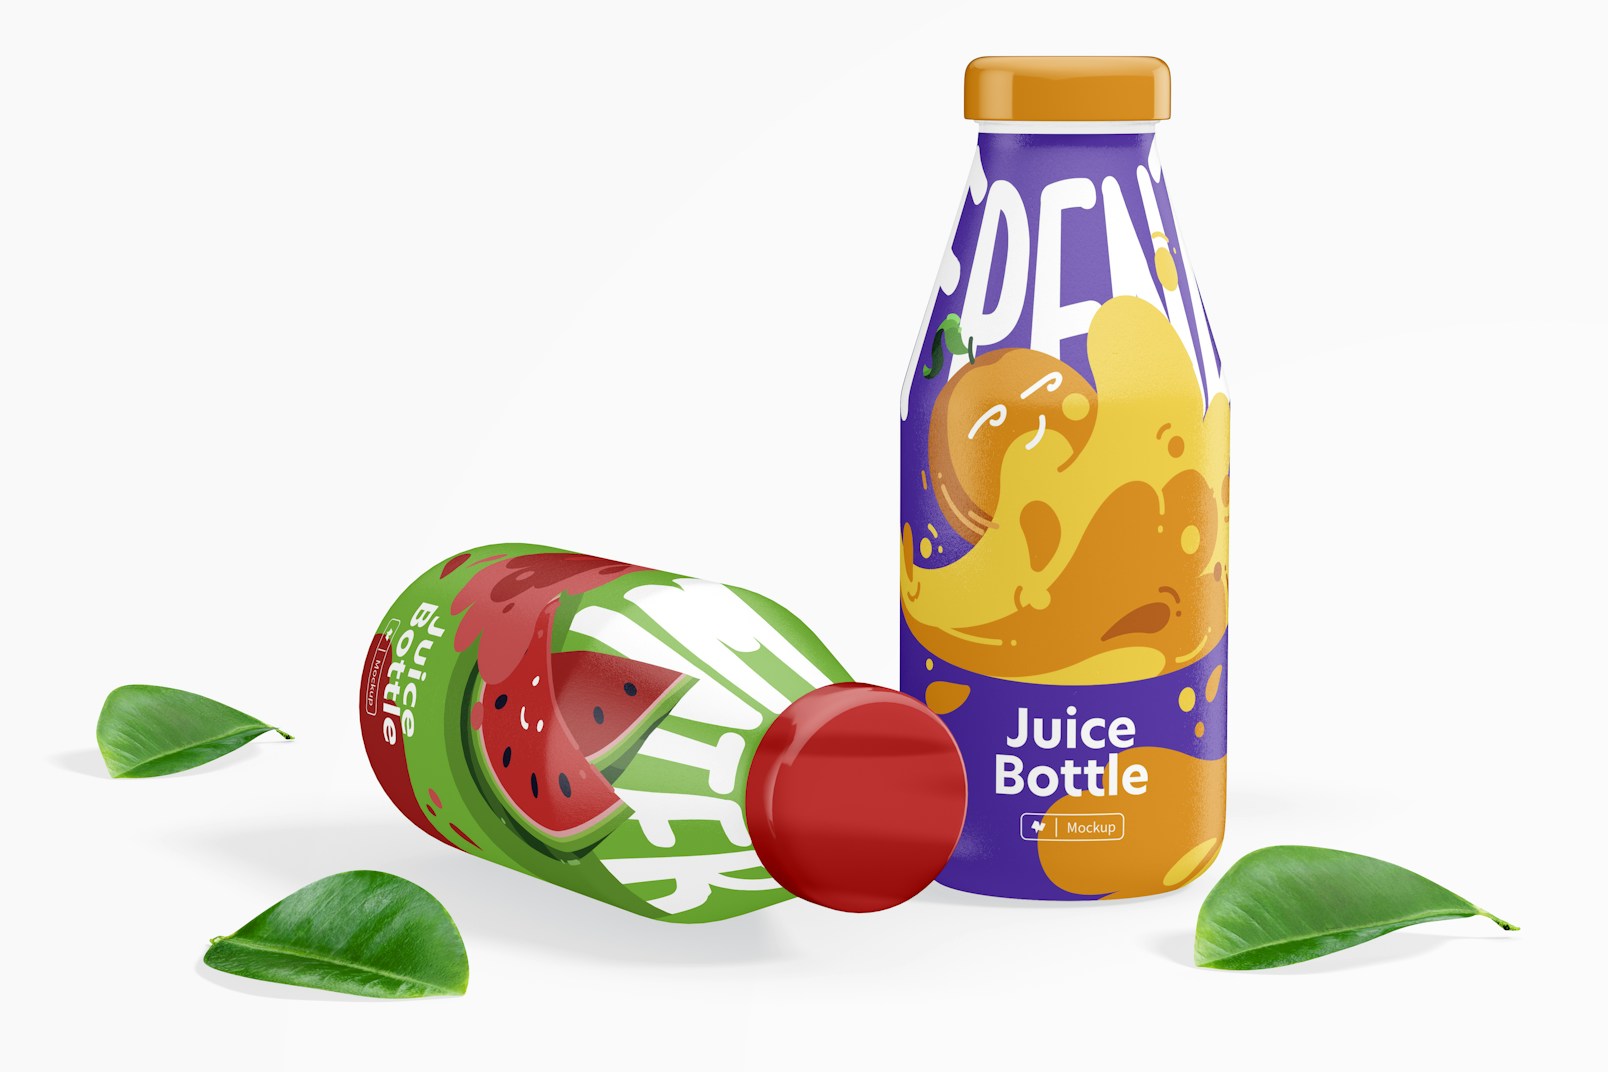 Full Label Juice Bottle Mockup, Standing and Dropped